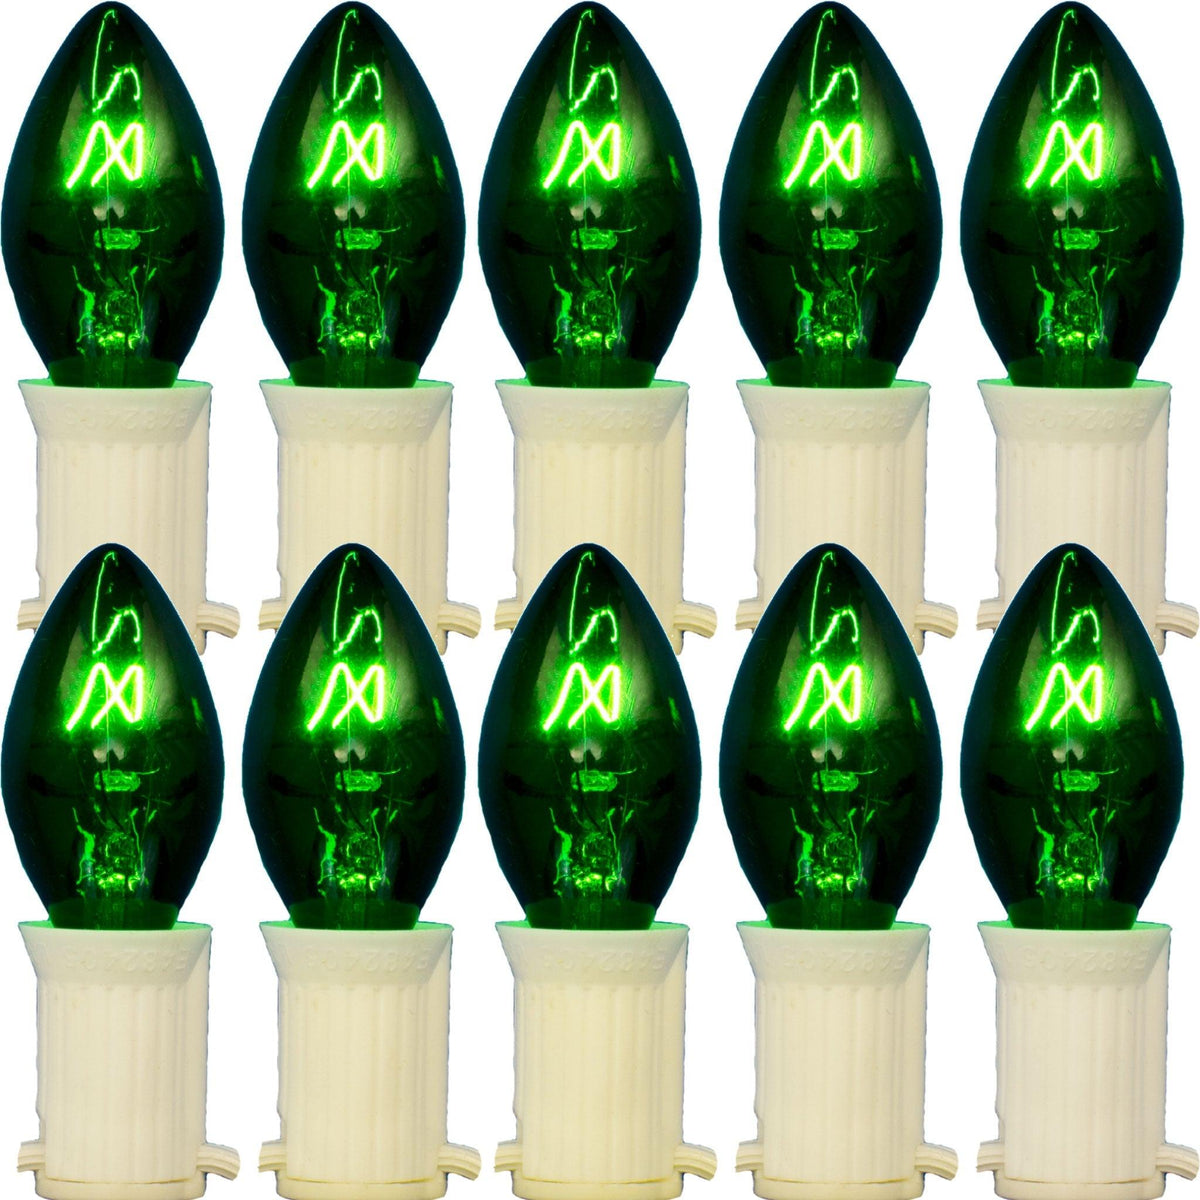 C-7 & C-9 Green Christmas Light Bulbs.  Replace your old bulbs with a set of brand new Candelabra Green Lights on sale at leedisplay.com